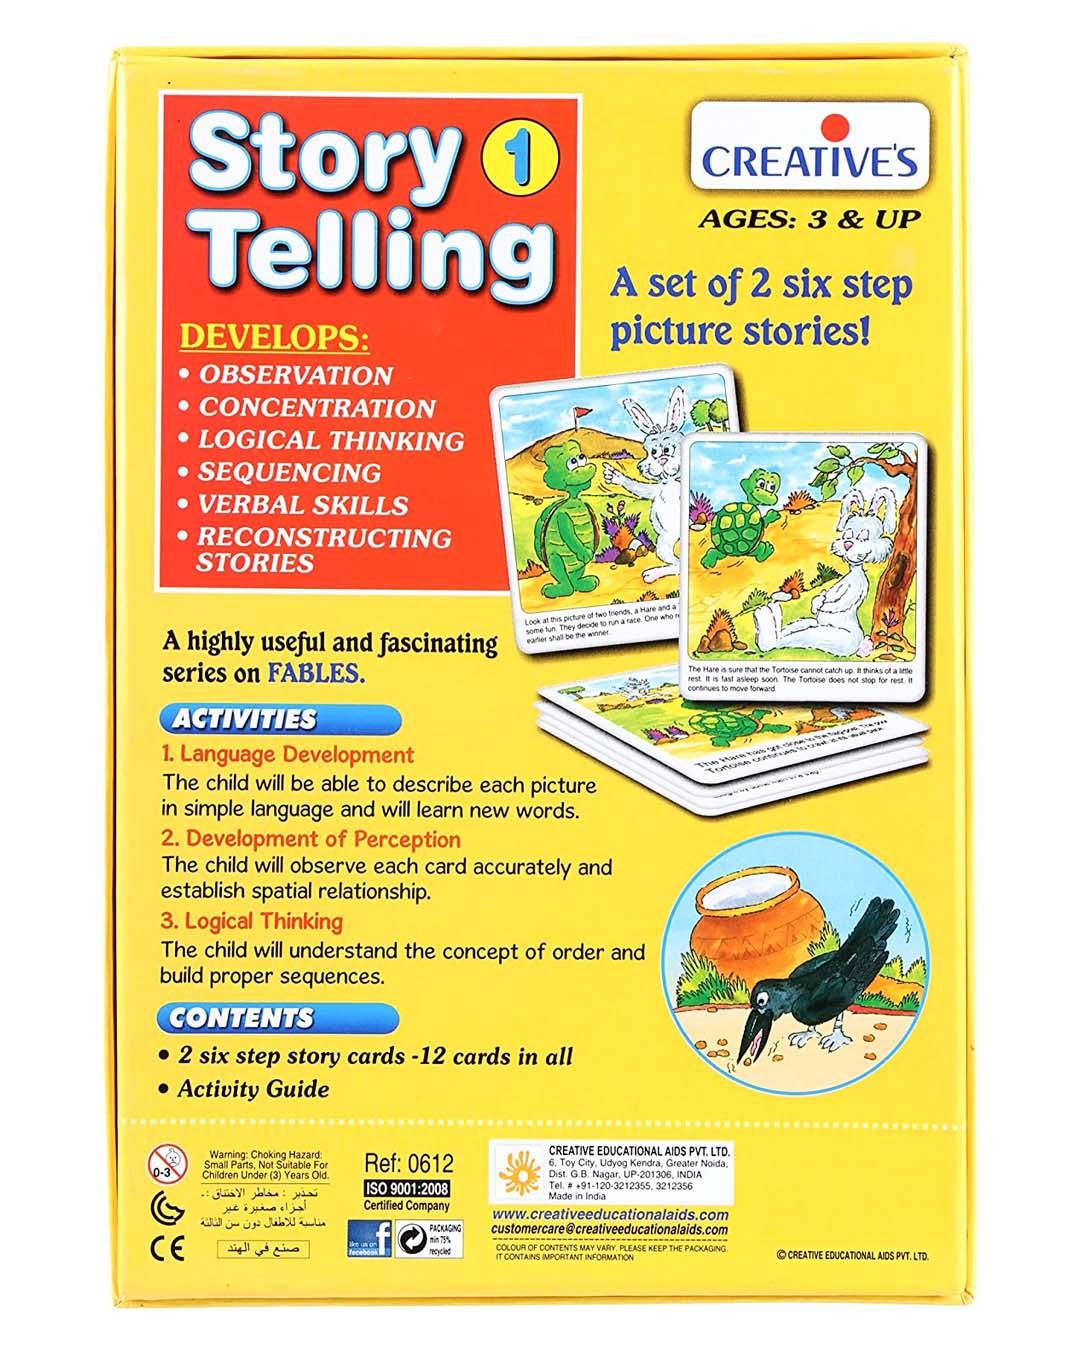 Creative Story Telling Step-By-Step-1 (6 Steps) - For Child Age 5 & Up - MARKET 99